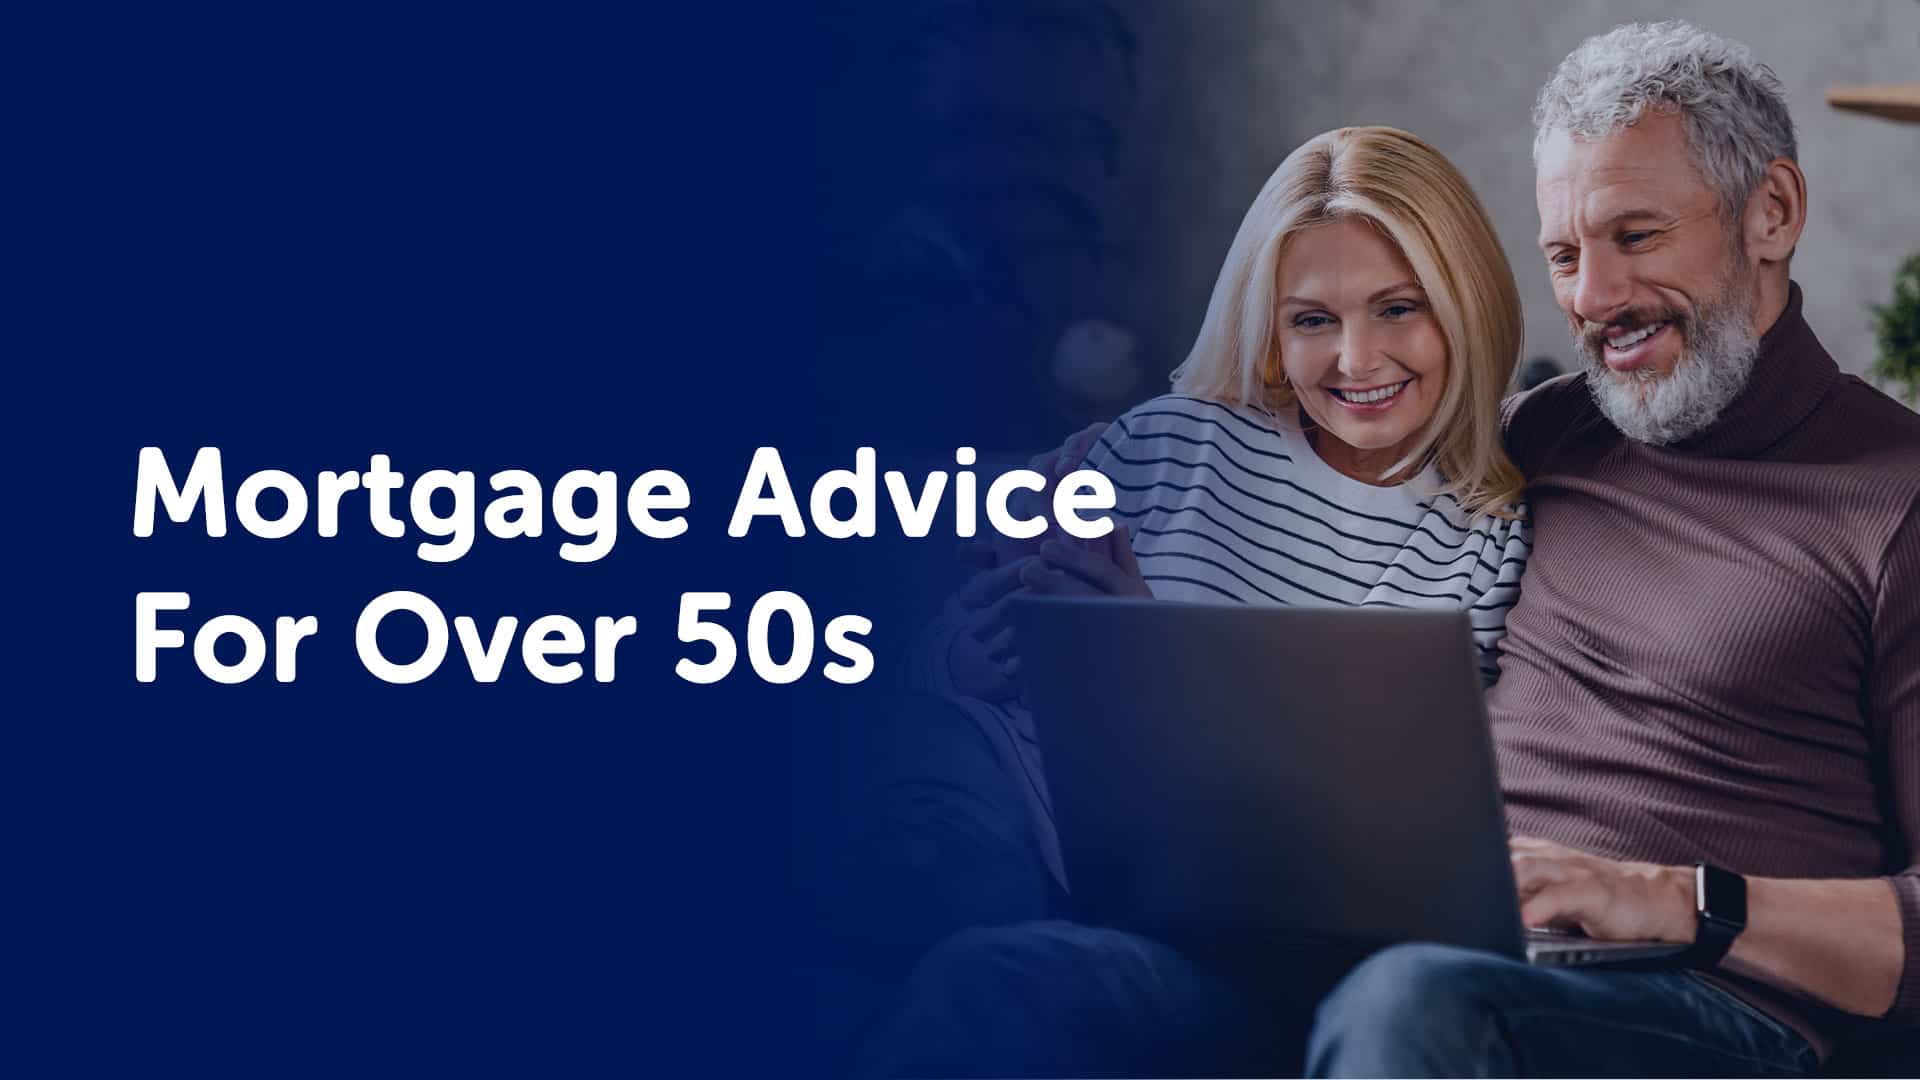 Mortgages For Over 50s in Liverpool - Understanding Basics